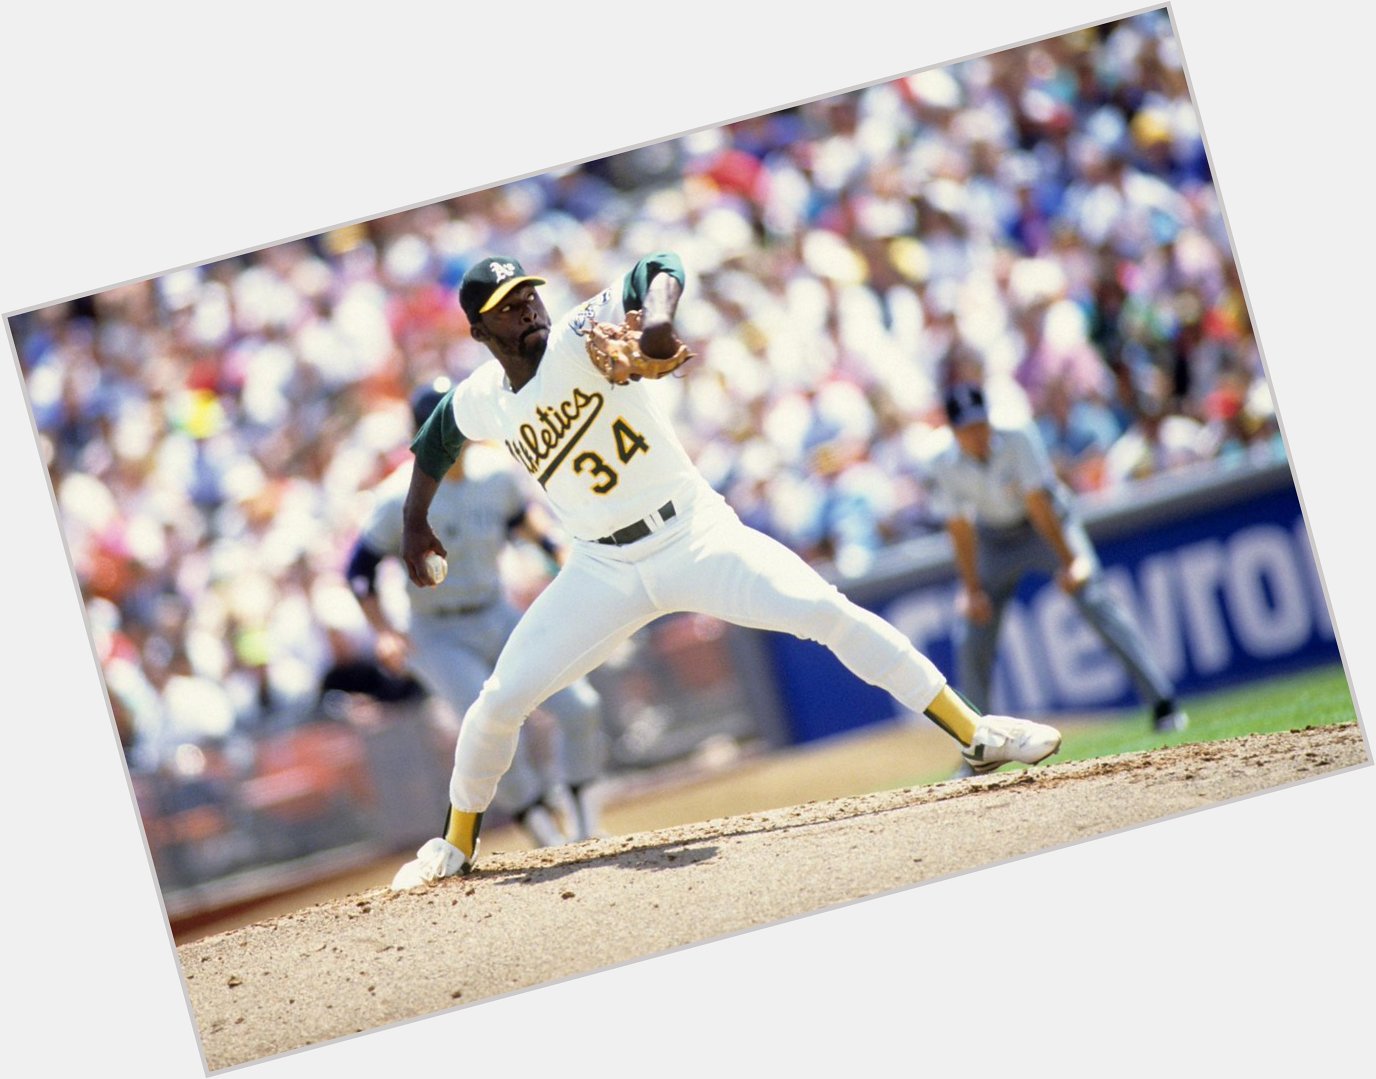 Happy 58th birthday to Dave Stewart. From 1987 1990, he won 20 games each with a 3.20 ERA (120 ERA+) and 41 CG. 